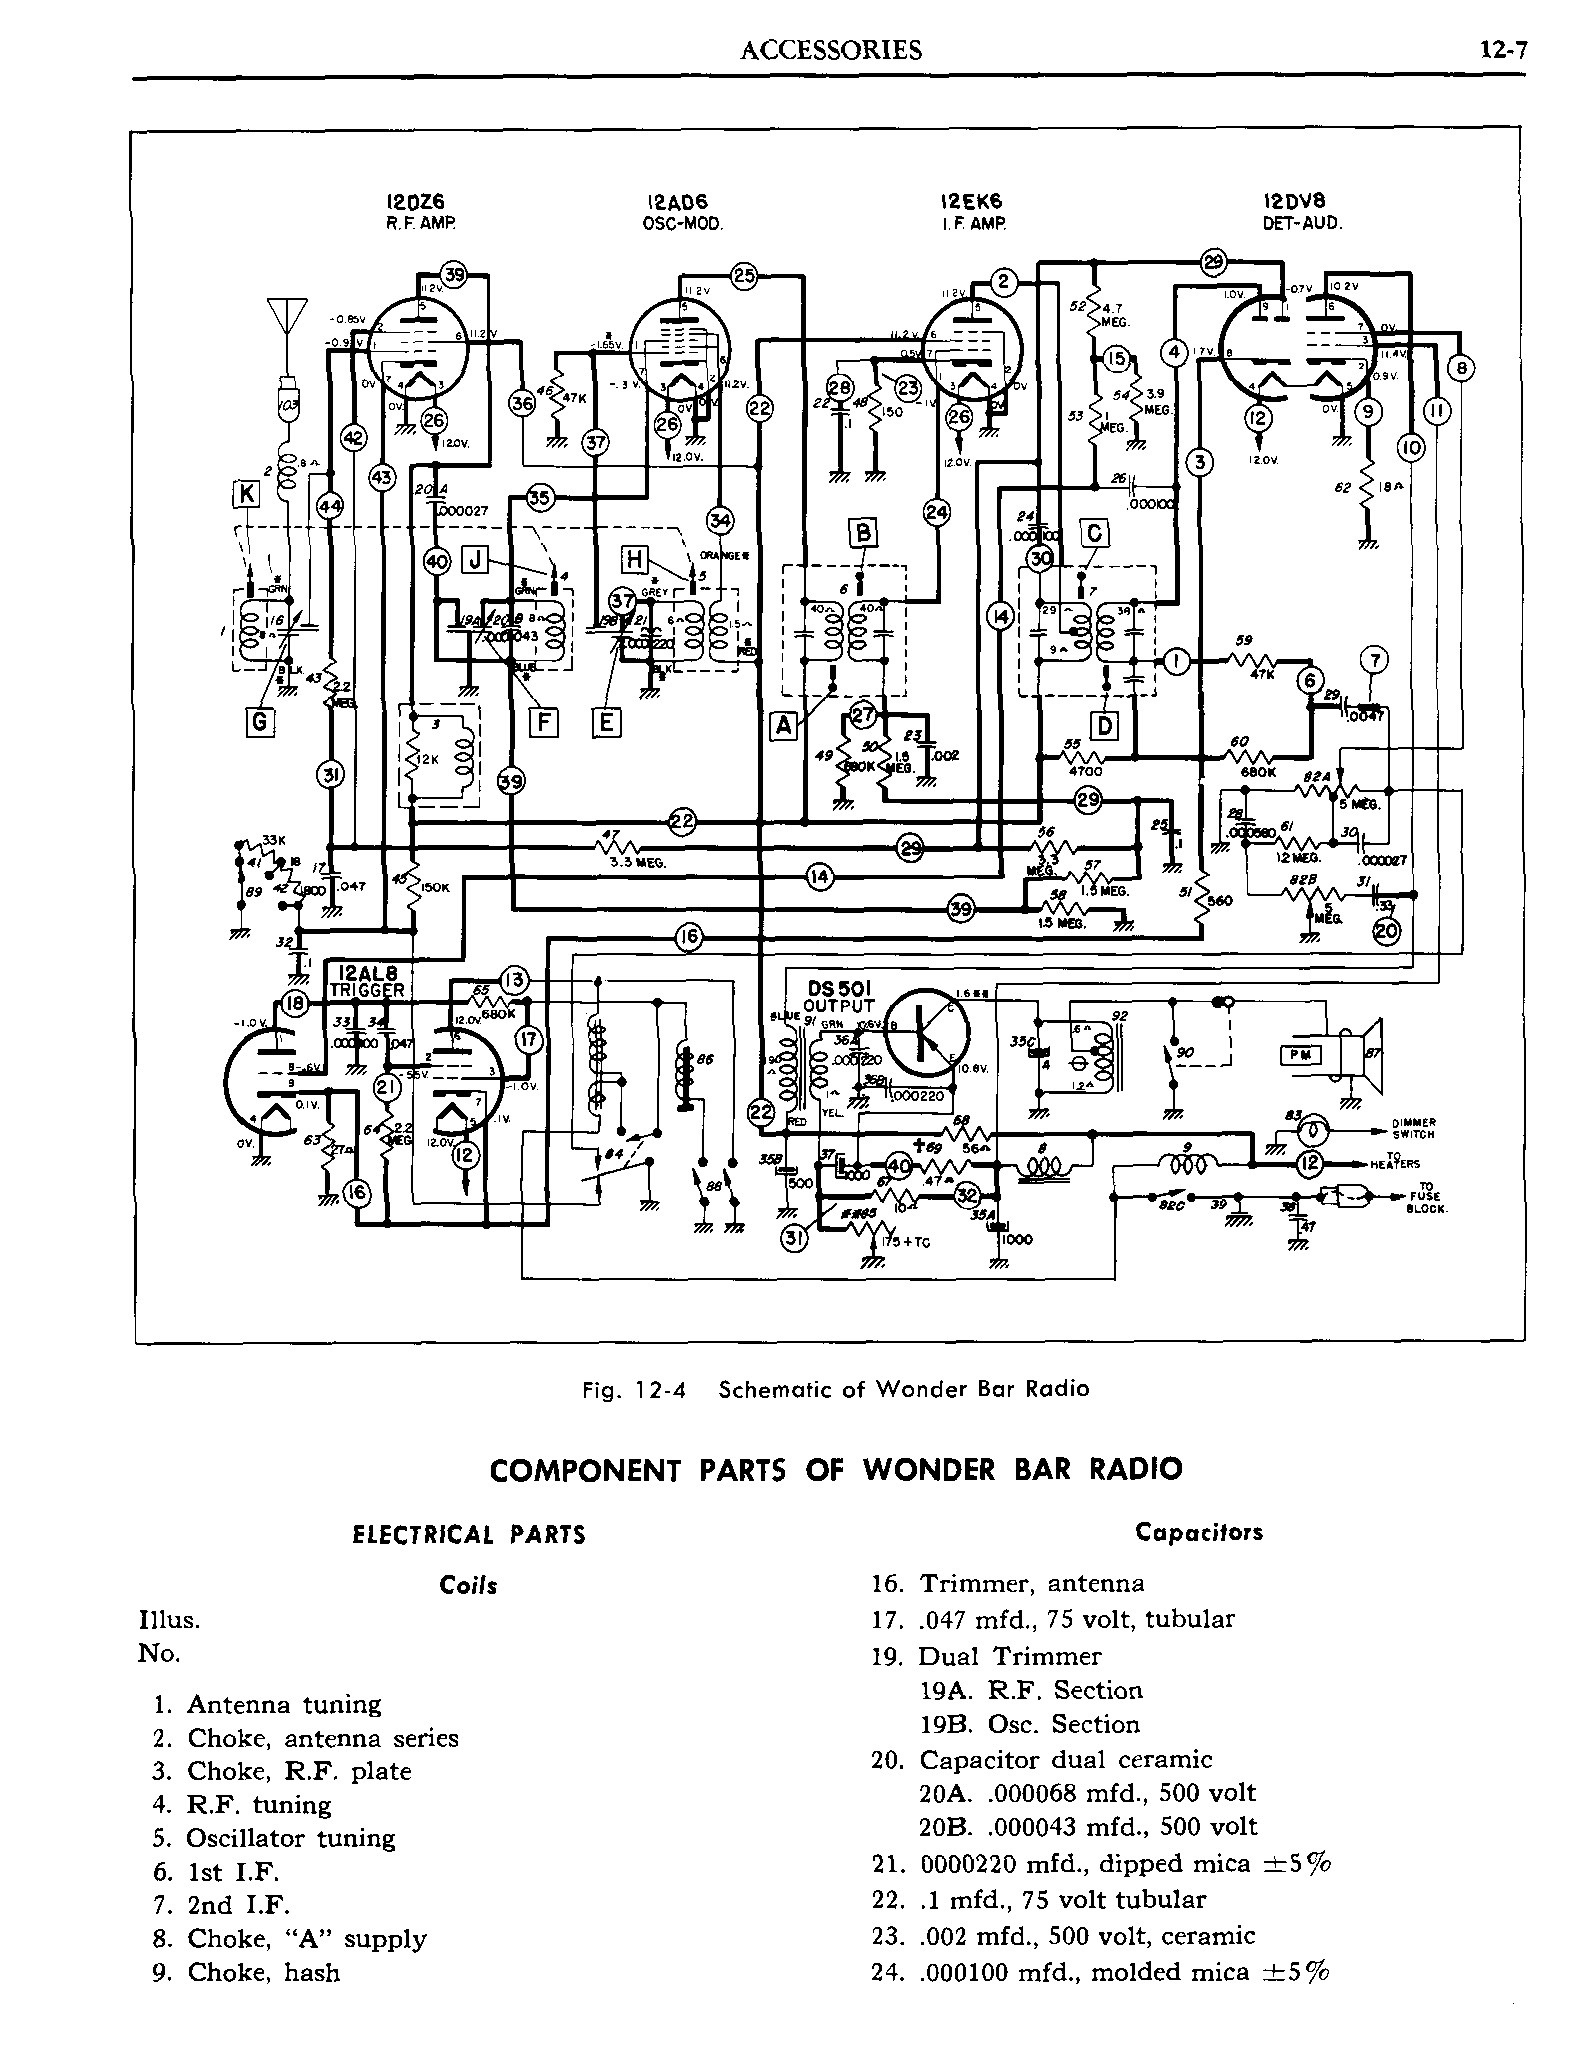 1962 Pontiac Chassis Service Manual- Accessories Page 7 of 20